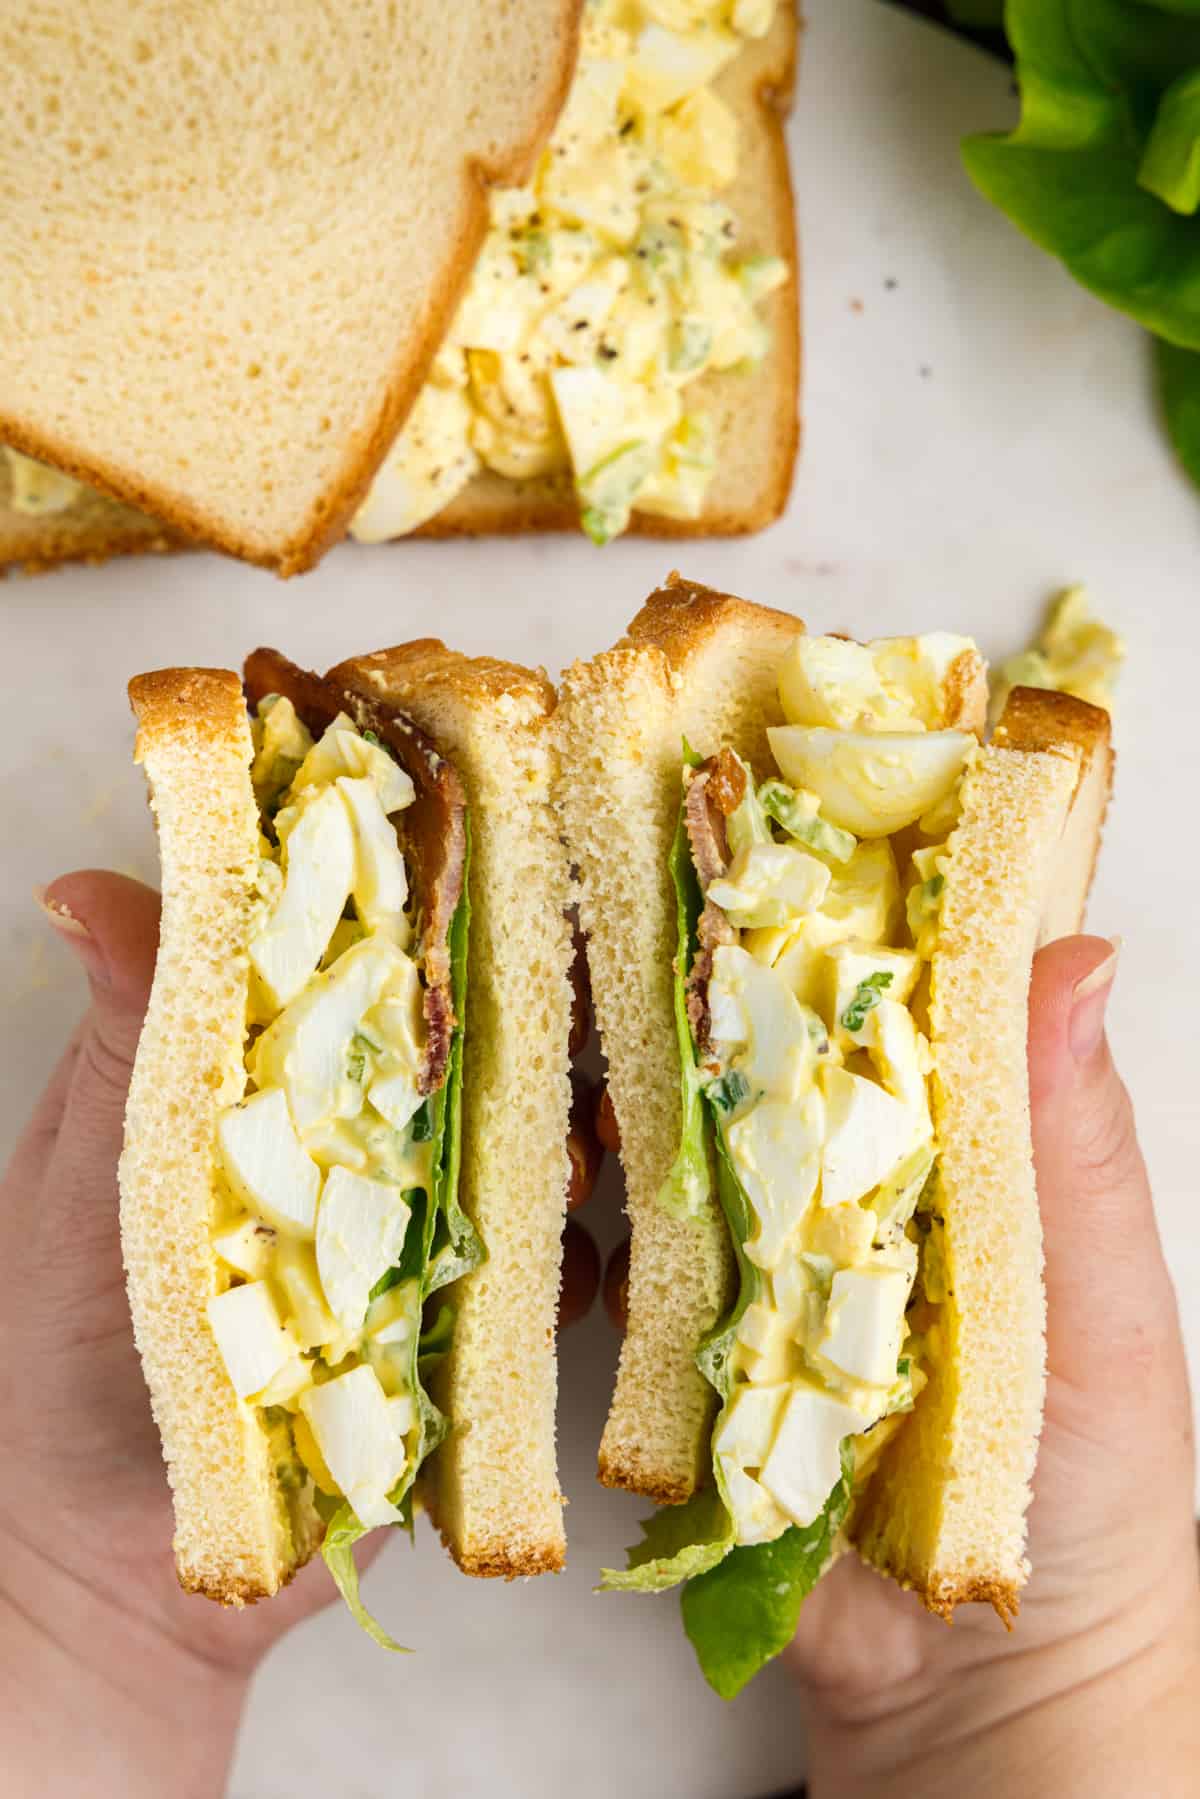 Two hands holding an egg salad sandwich with bacon and lettuce. An additional sandwich can be seen in the background.